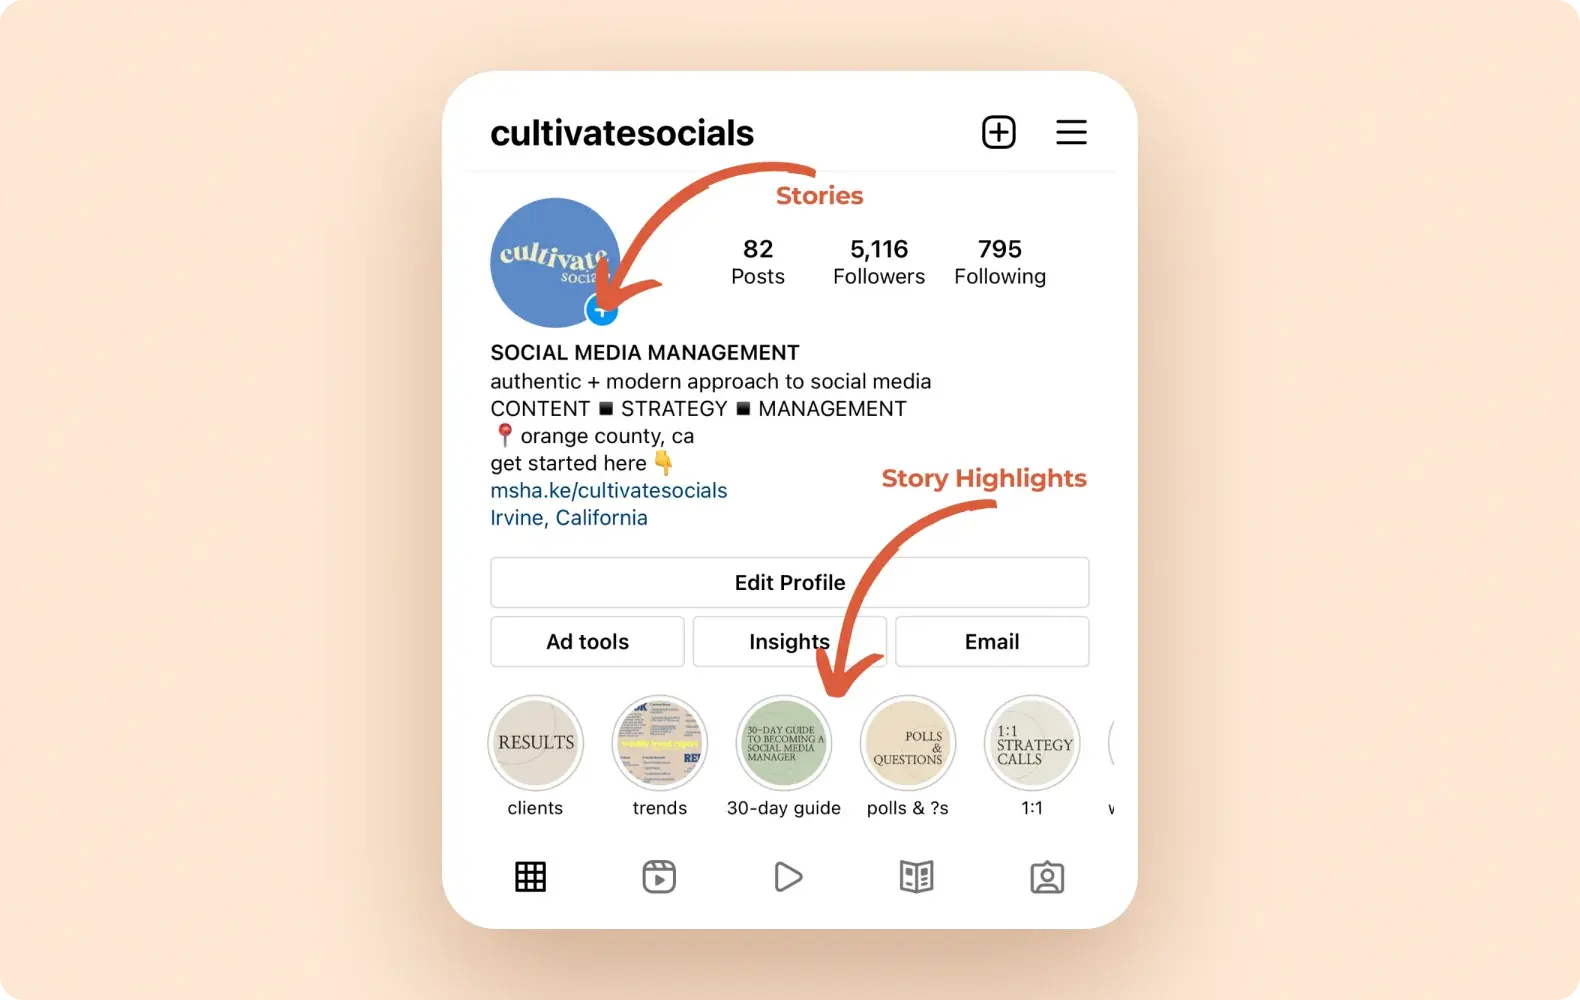 Information about where to find Instagram stories and saved story highlights on an Instagram home page.